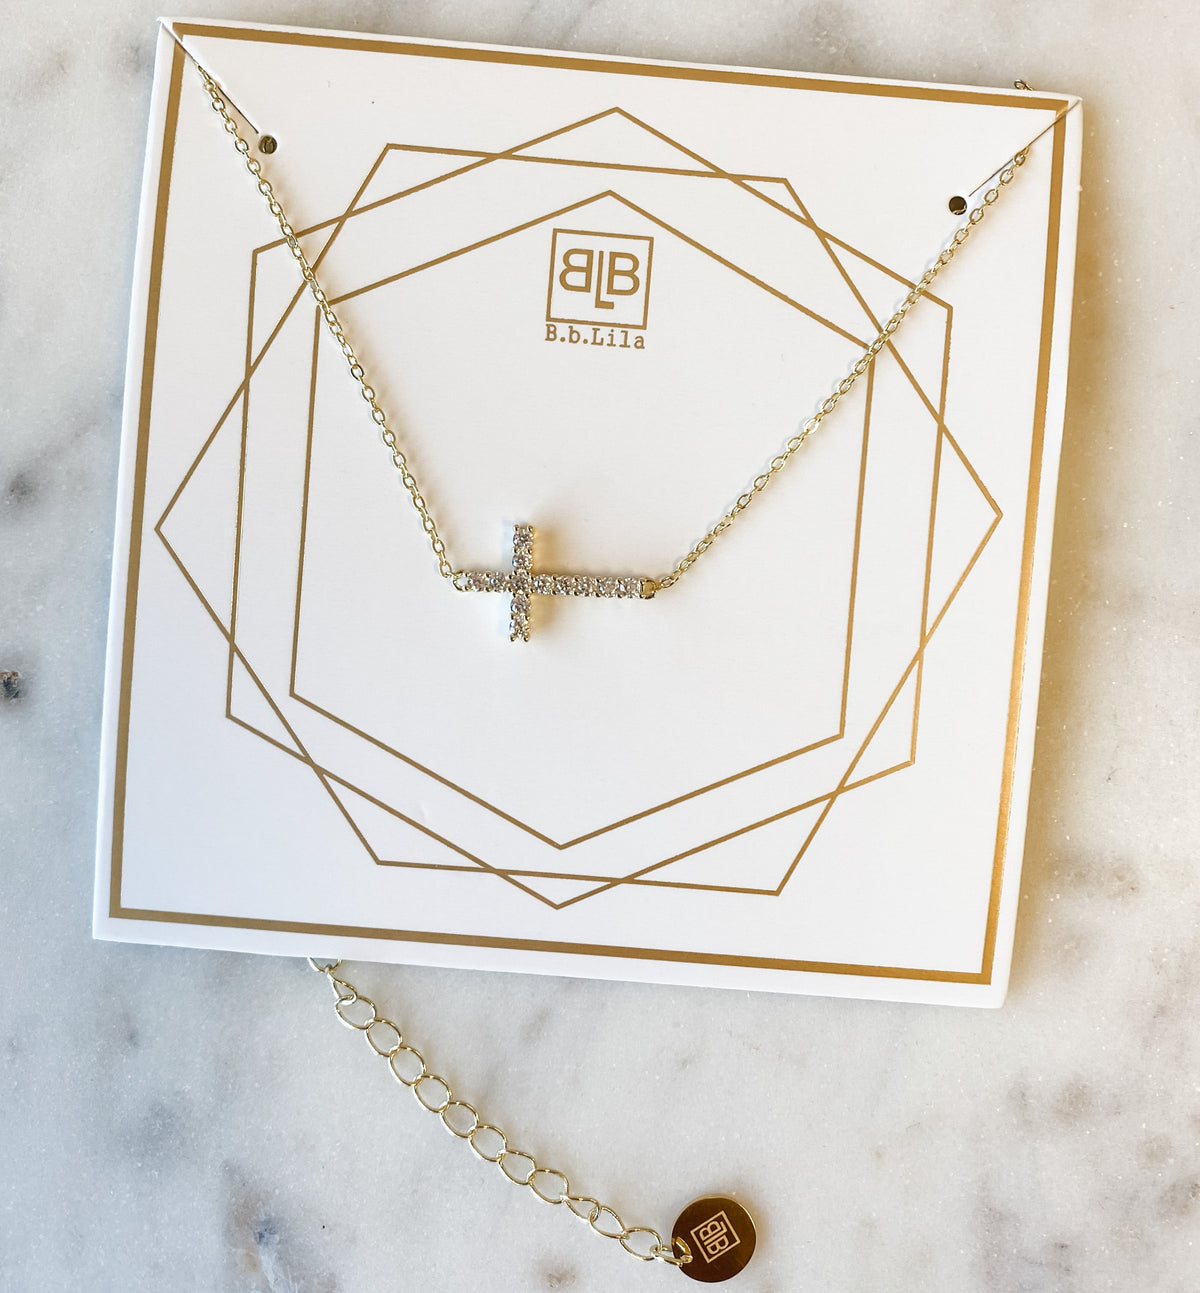 The Gift Gold Cross Necklace